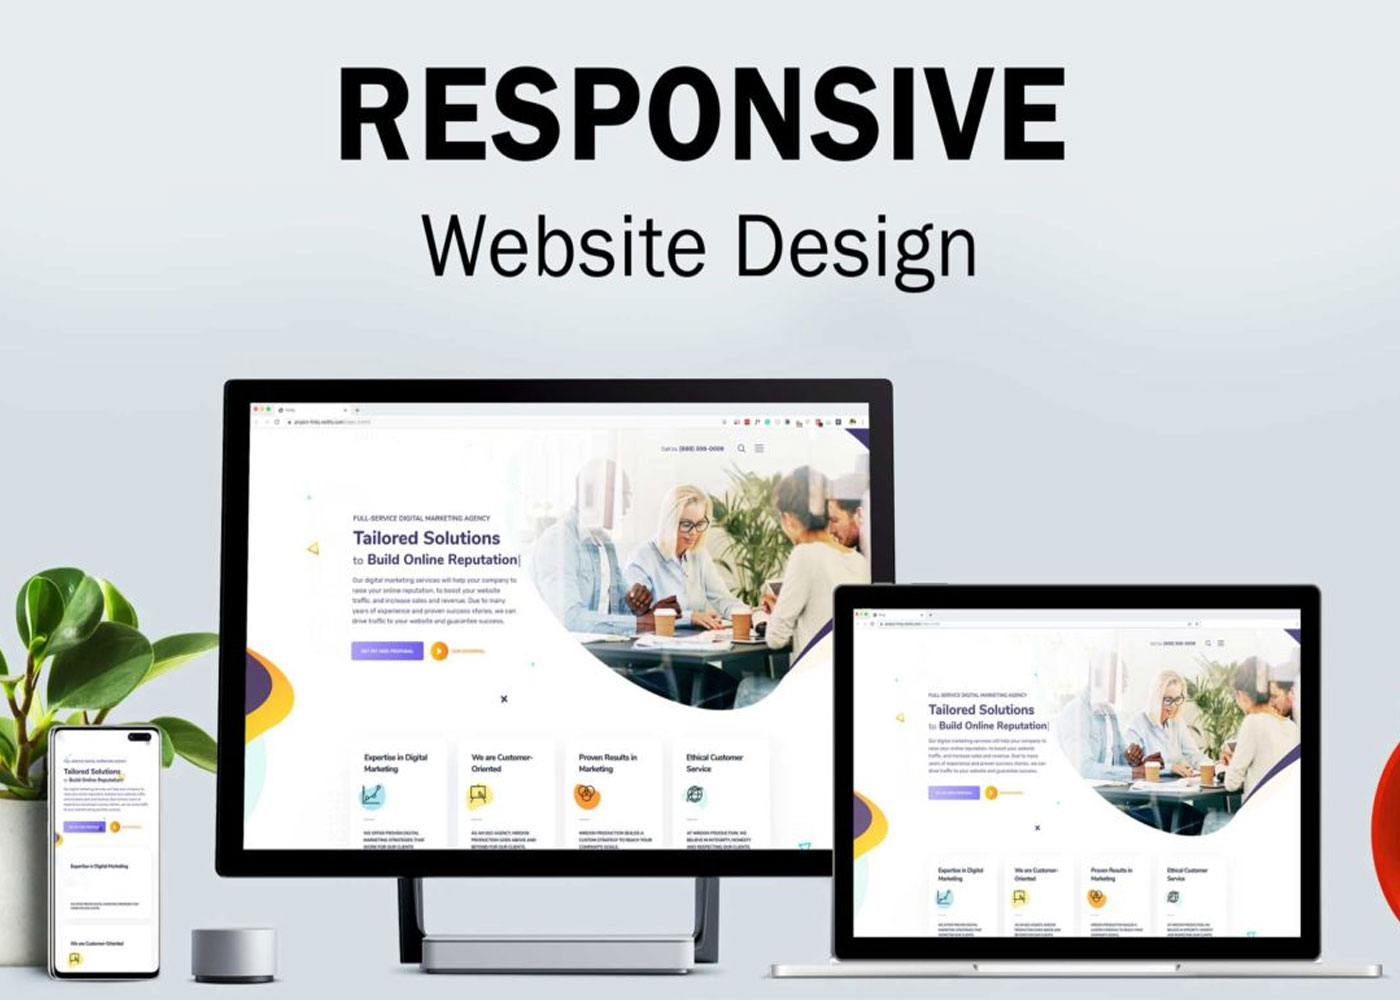 Responsive Web Design Essentials: Design Websites that Adapt to Any Device